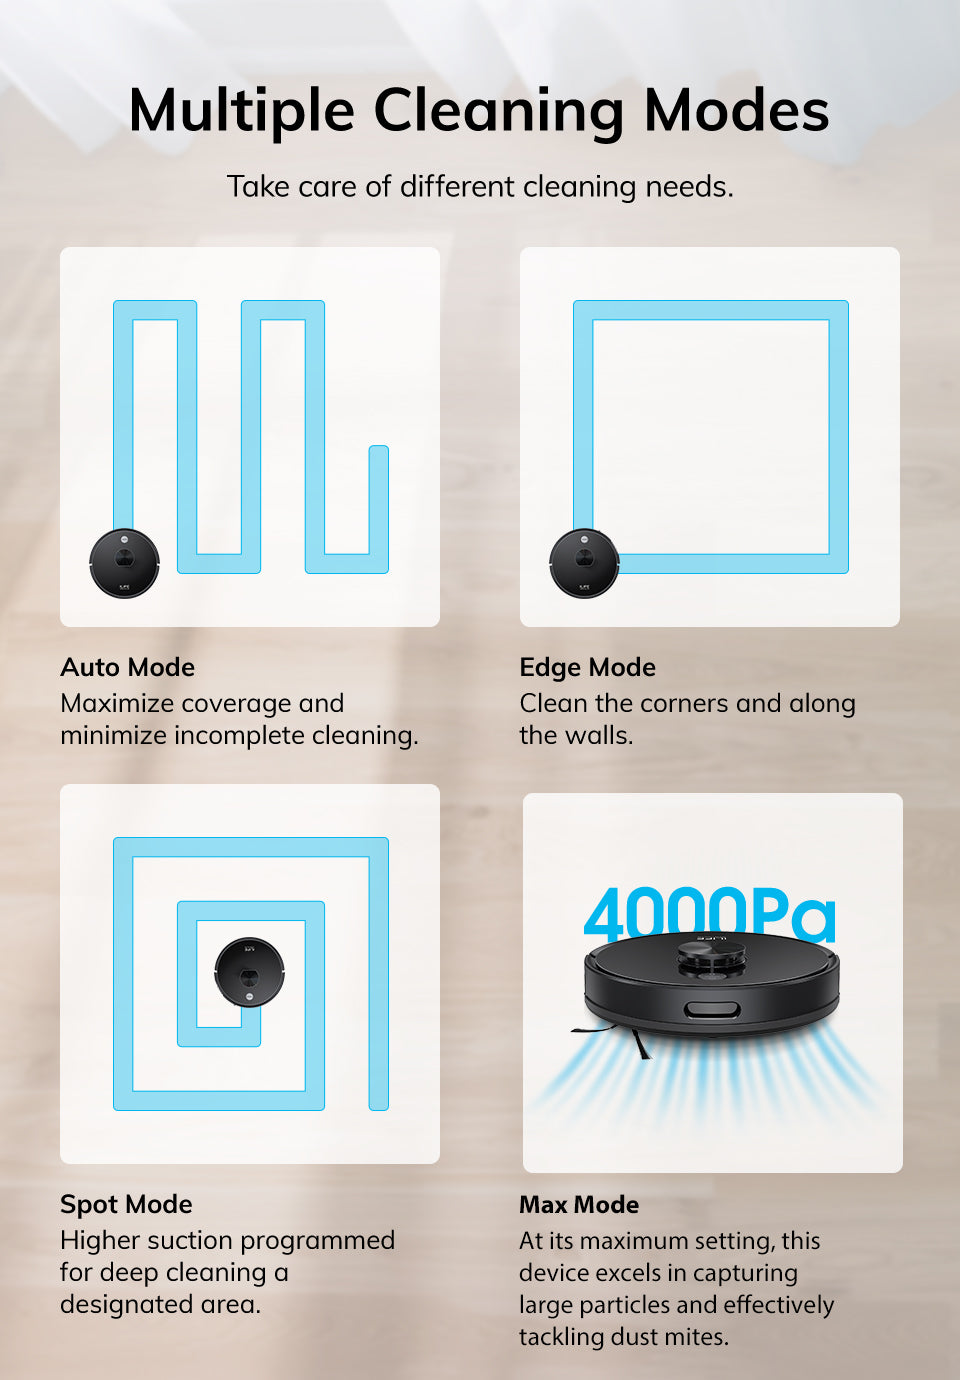 Multiple cleaning modes- auto mode, edge mode, spot mode, max mode